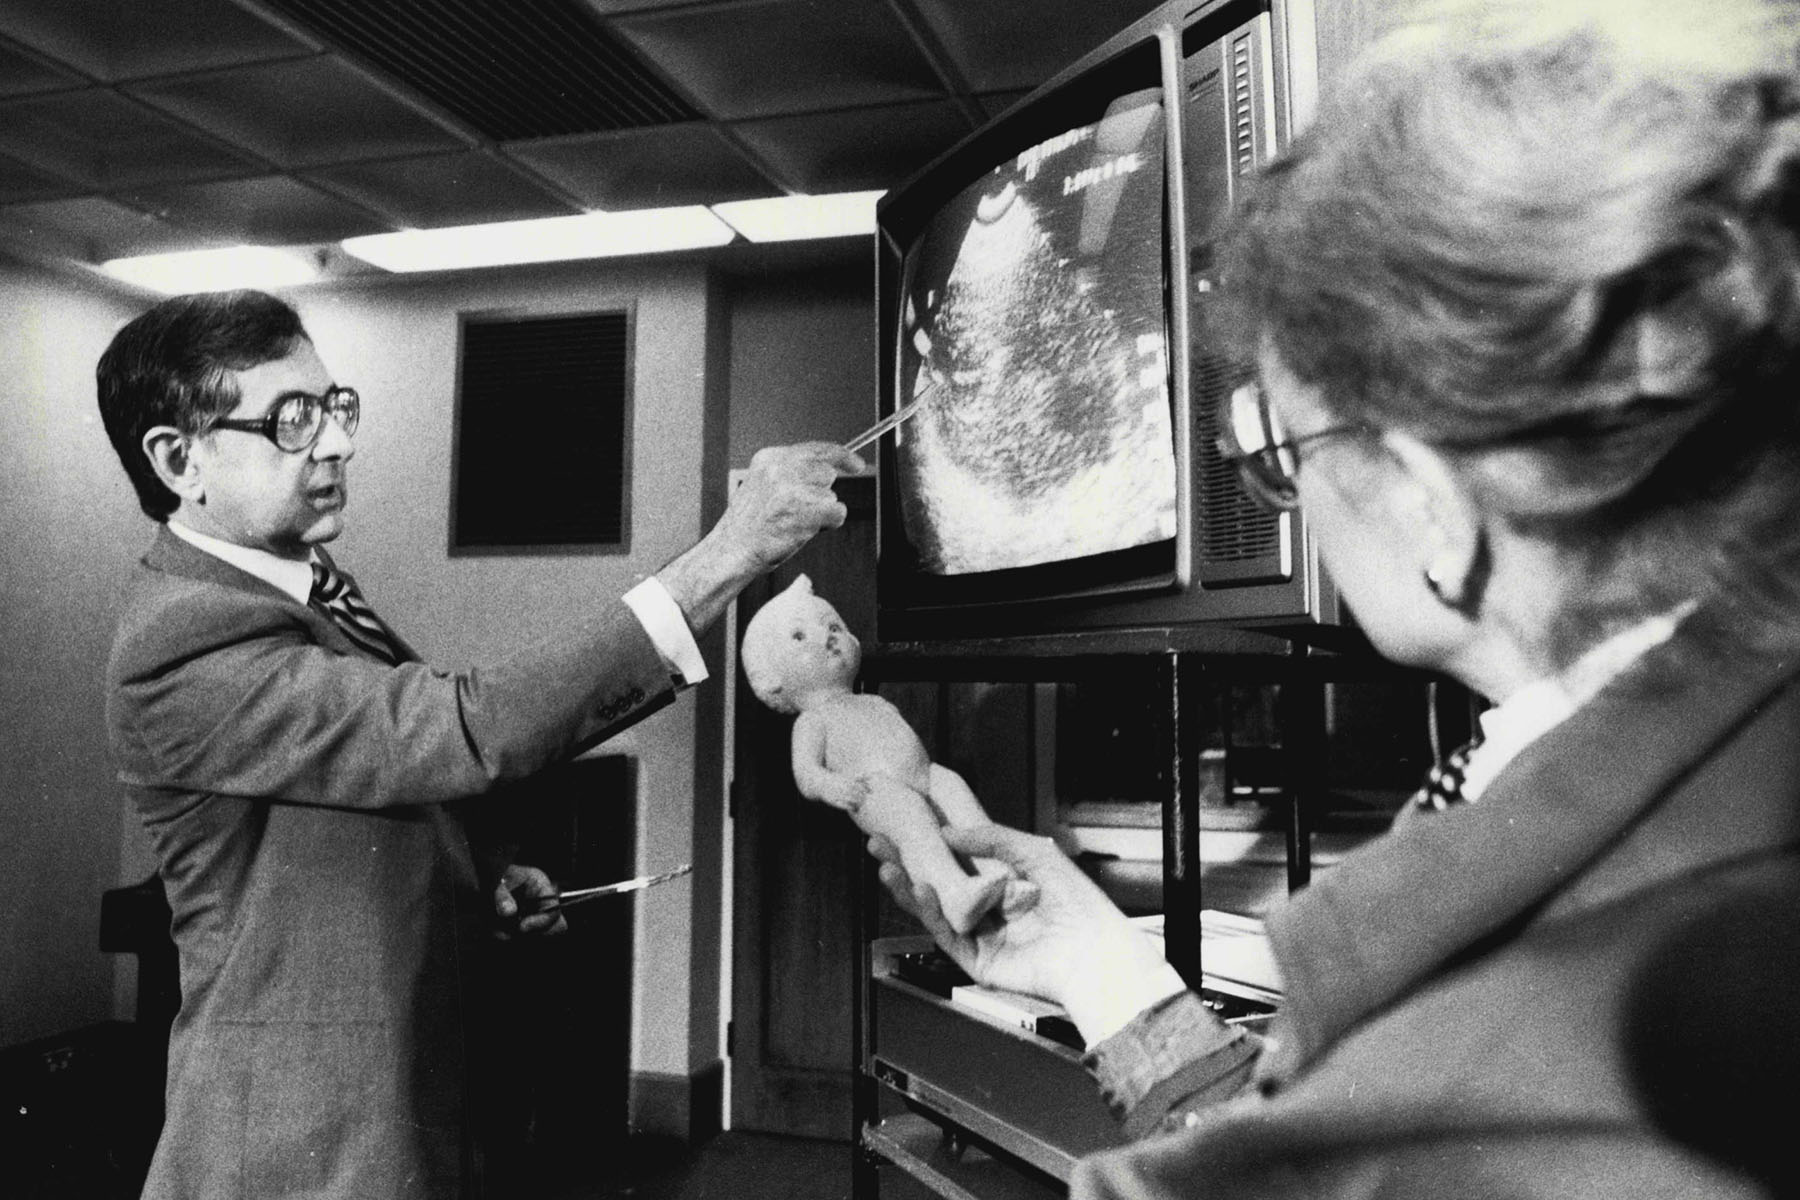 Dr. Nathanson points to a television screen on which an ultra sound is broadcasted.